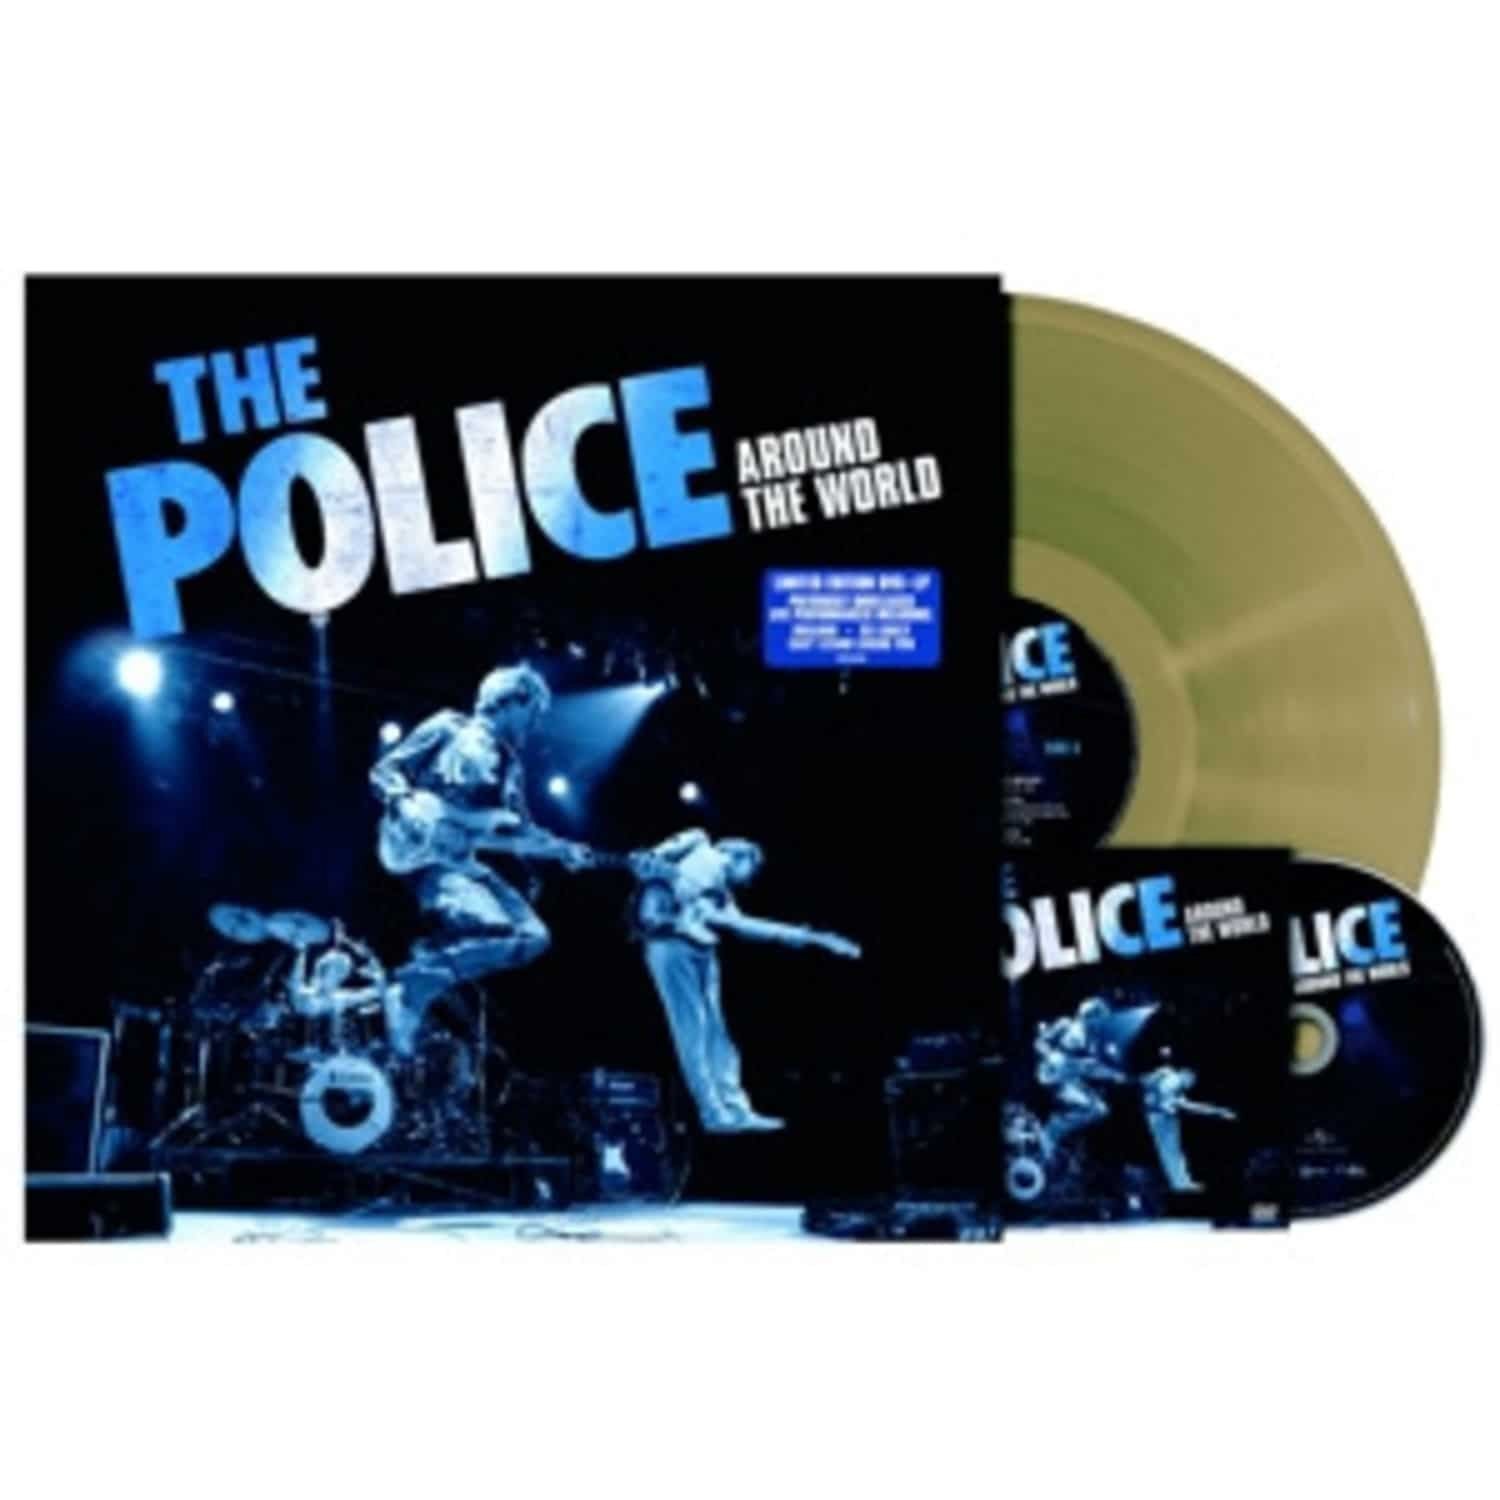 Around The World (2 Limited Colour Vinyl+DVD)-Police